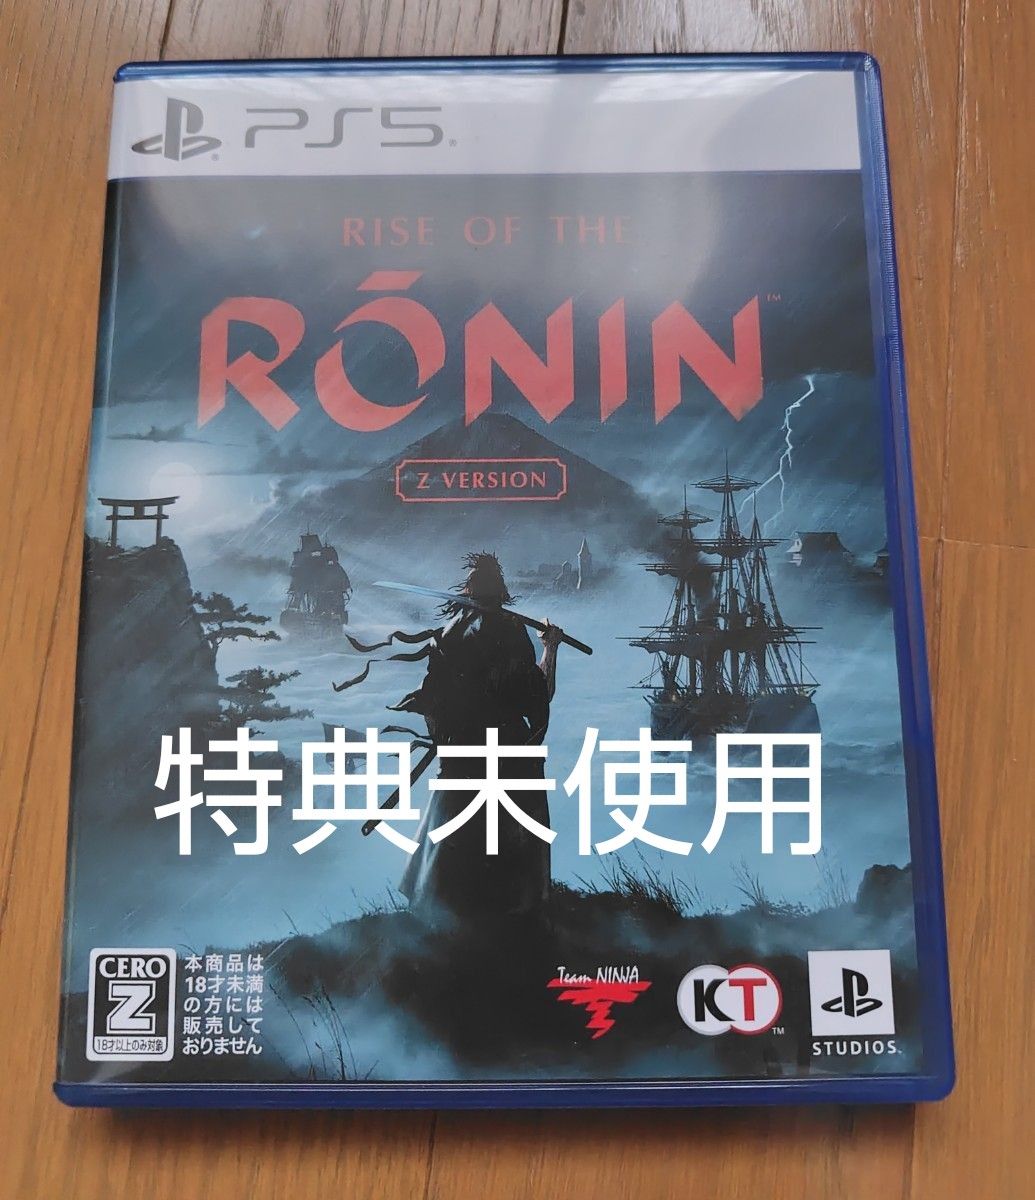 ［PS5］RISE OF THE RONIN Z VERSION 早期購入特典のコード未使用